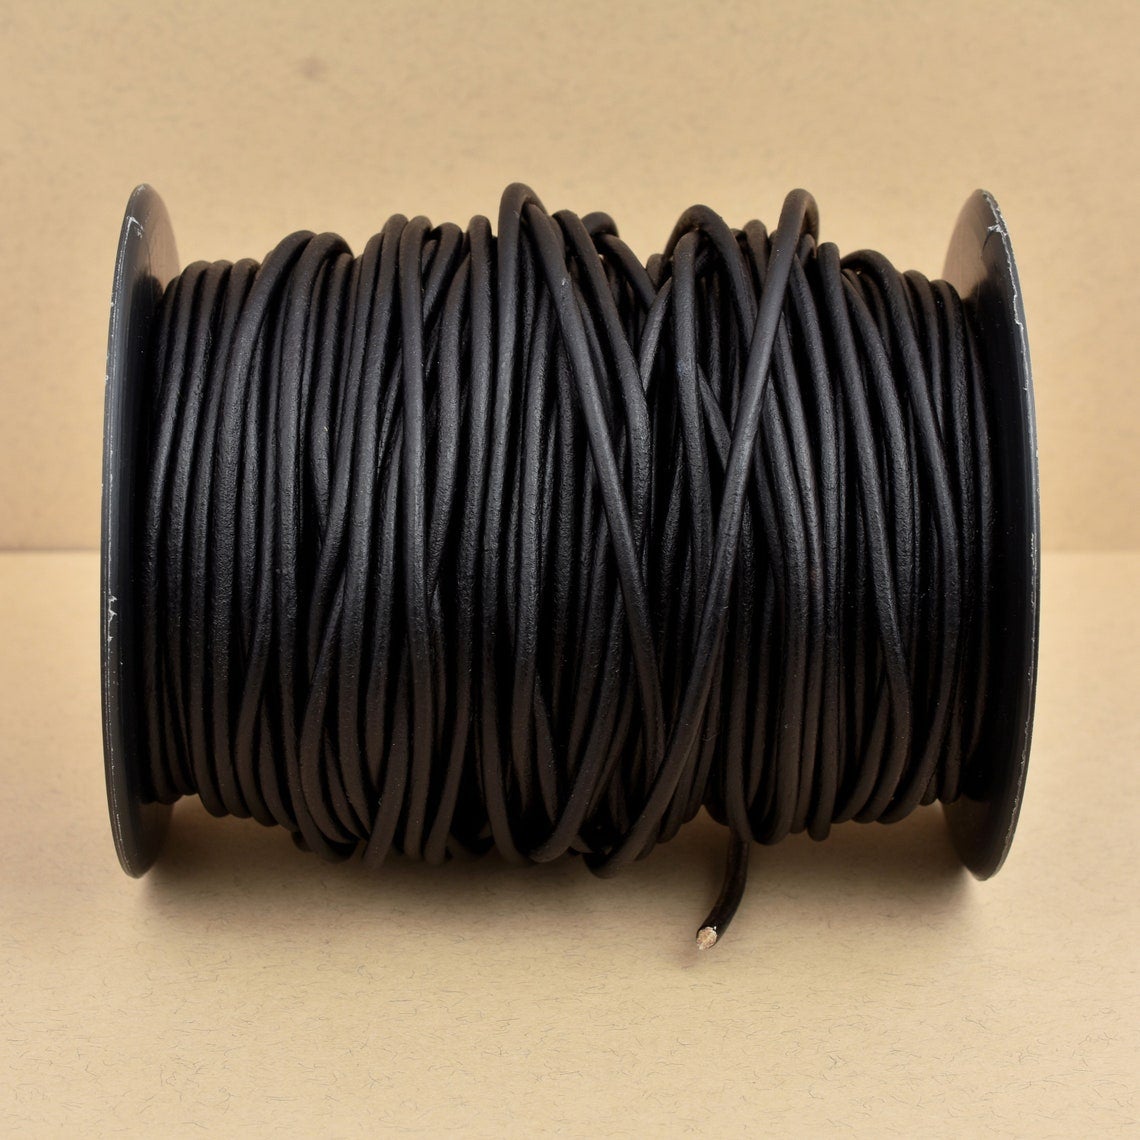 Greek Leather Cord - Natural 2.5mm